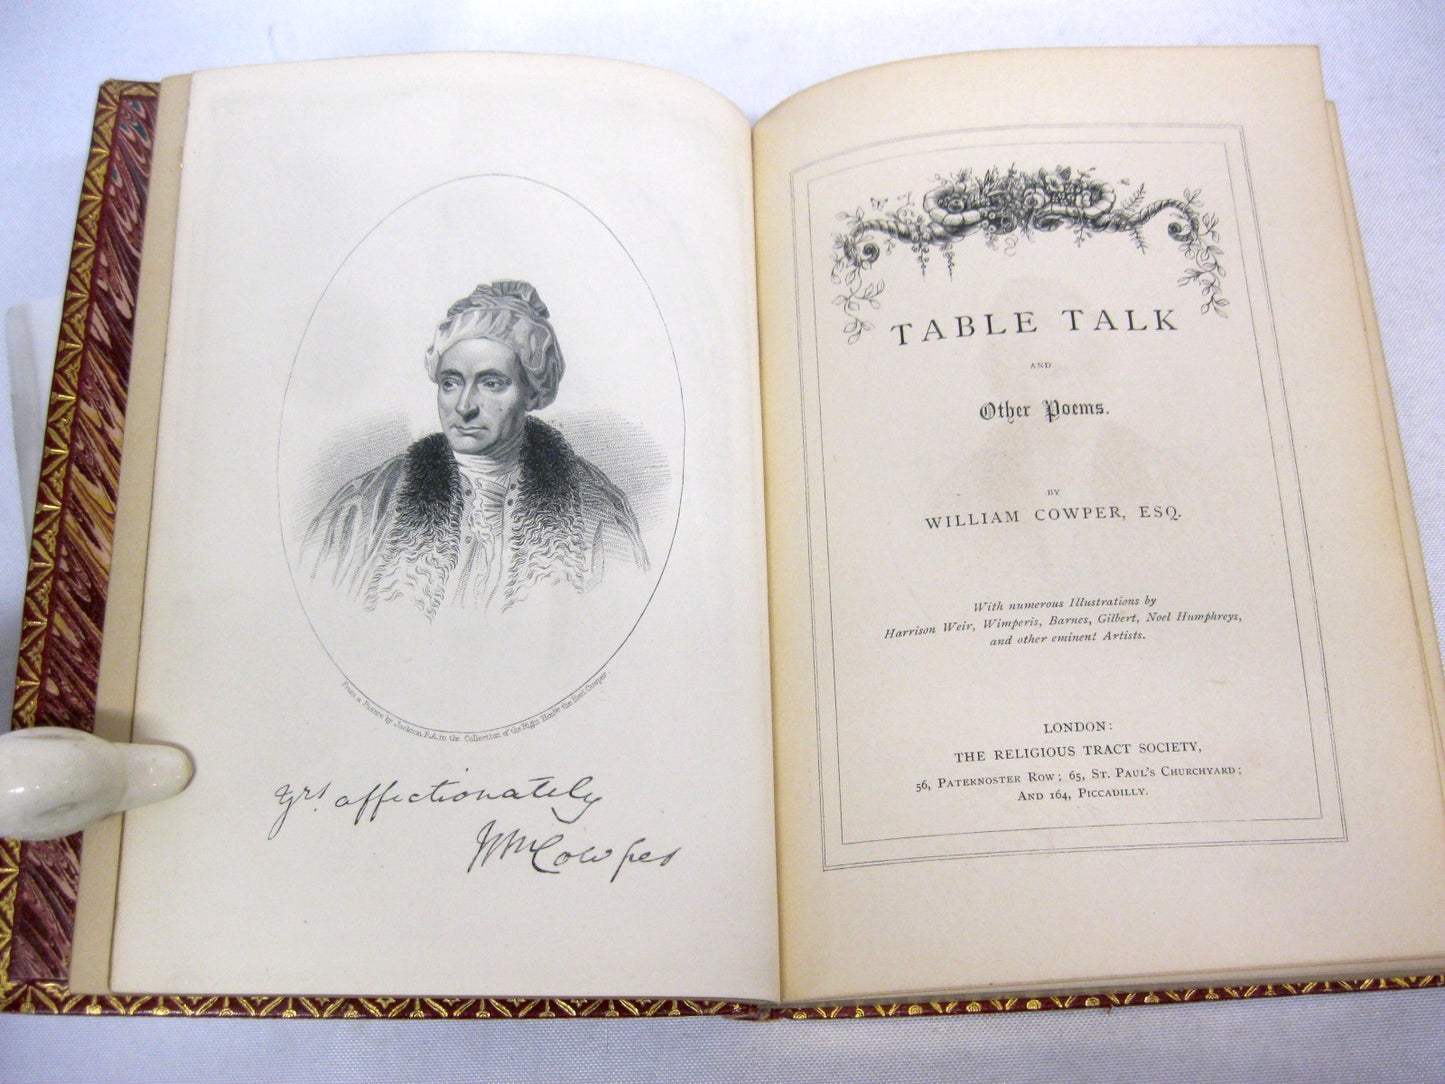 Table Talk & Other Poems by William Cowper